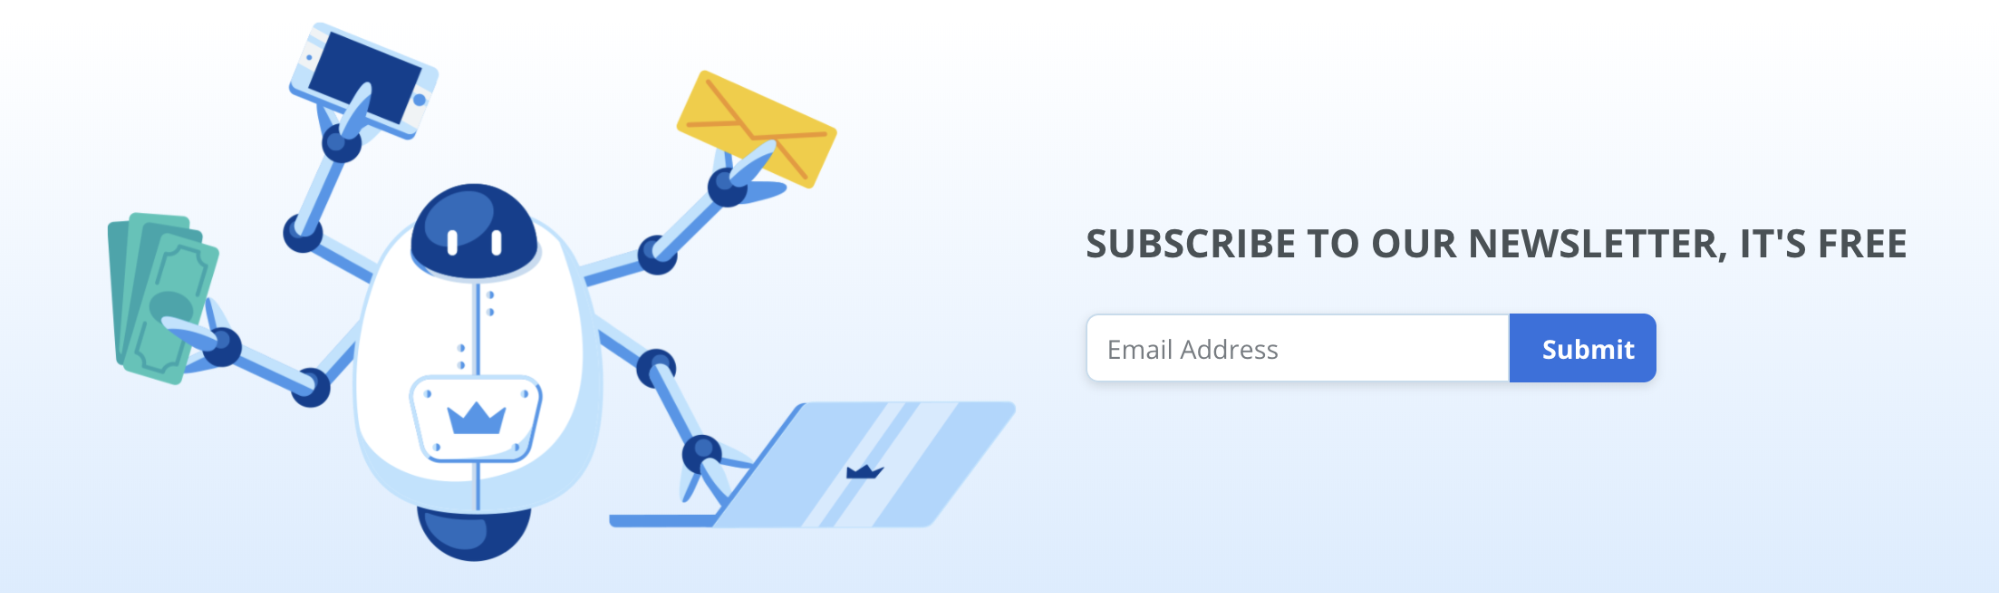 Screenshot showing the subscribe button on Sumo